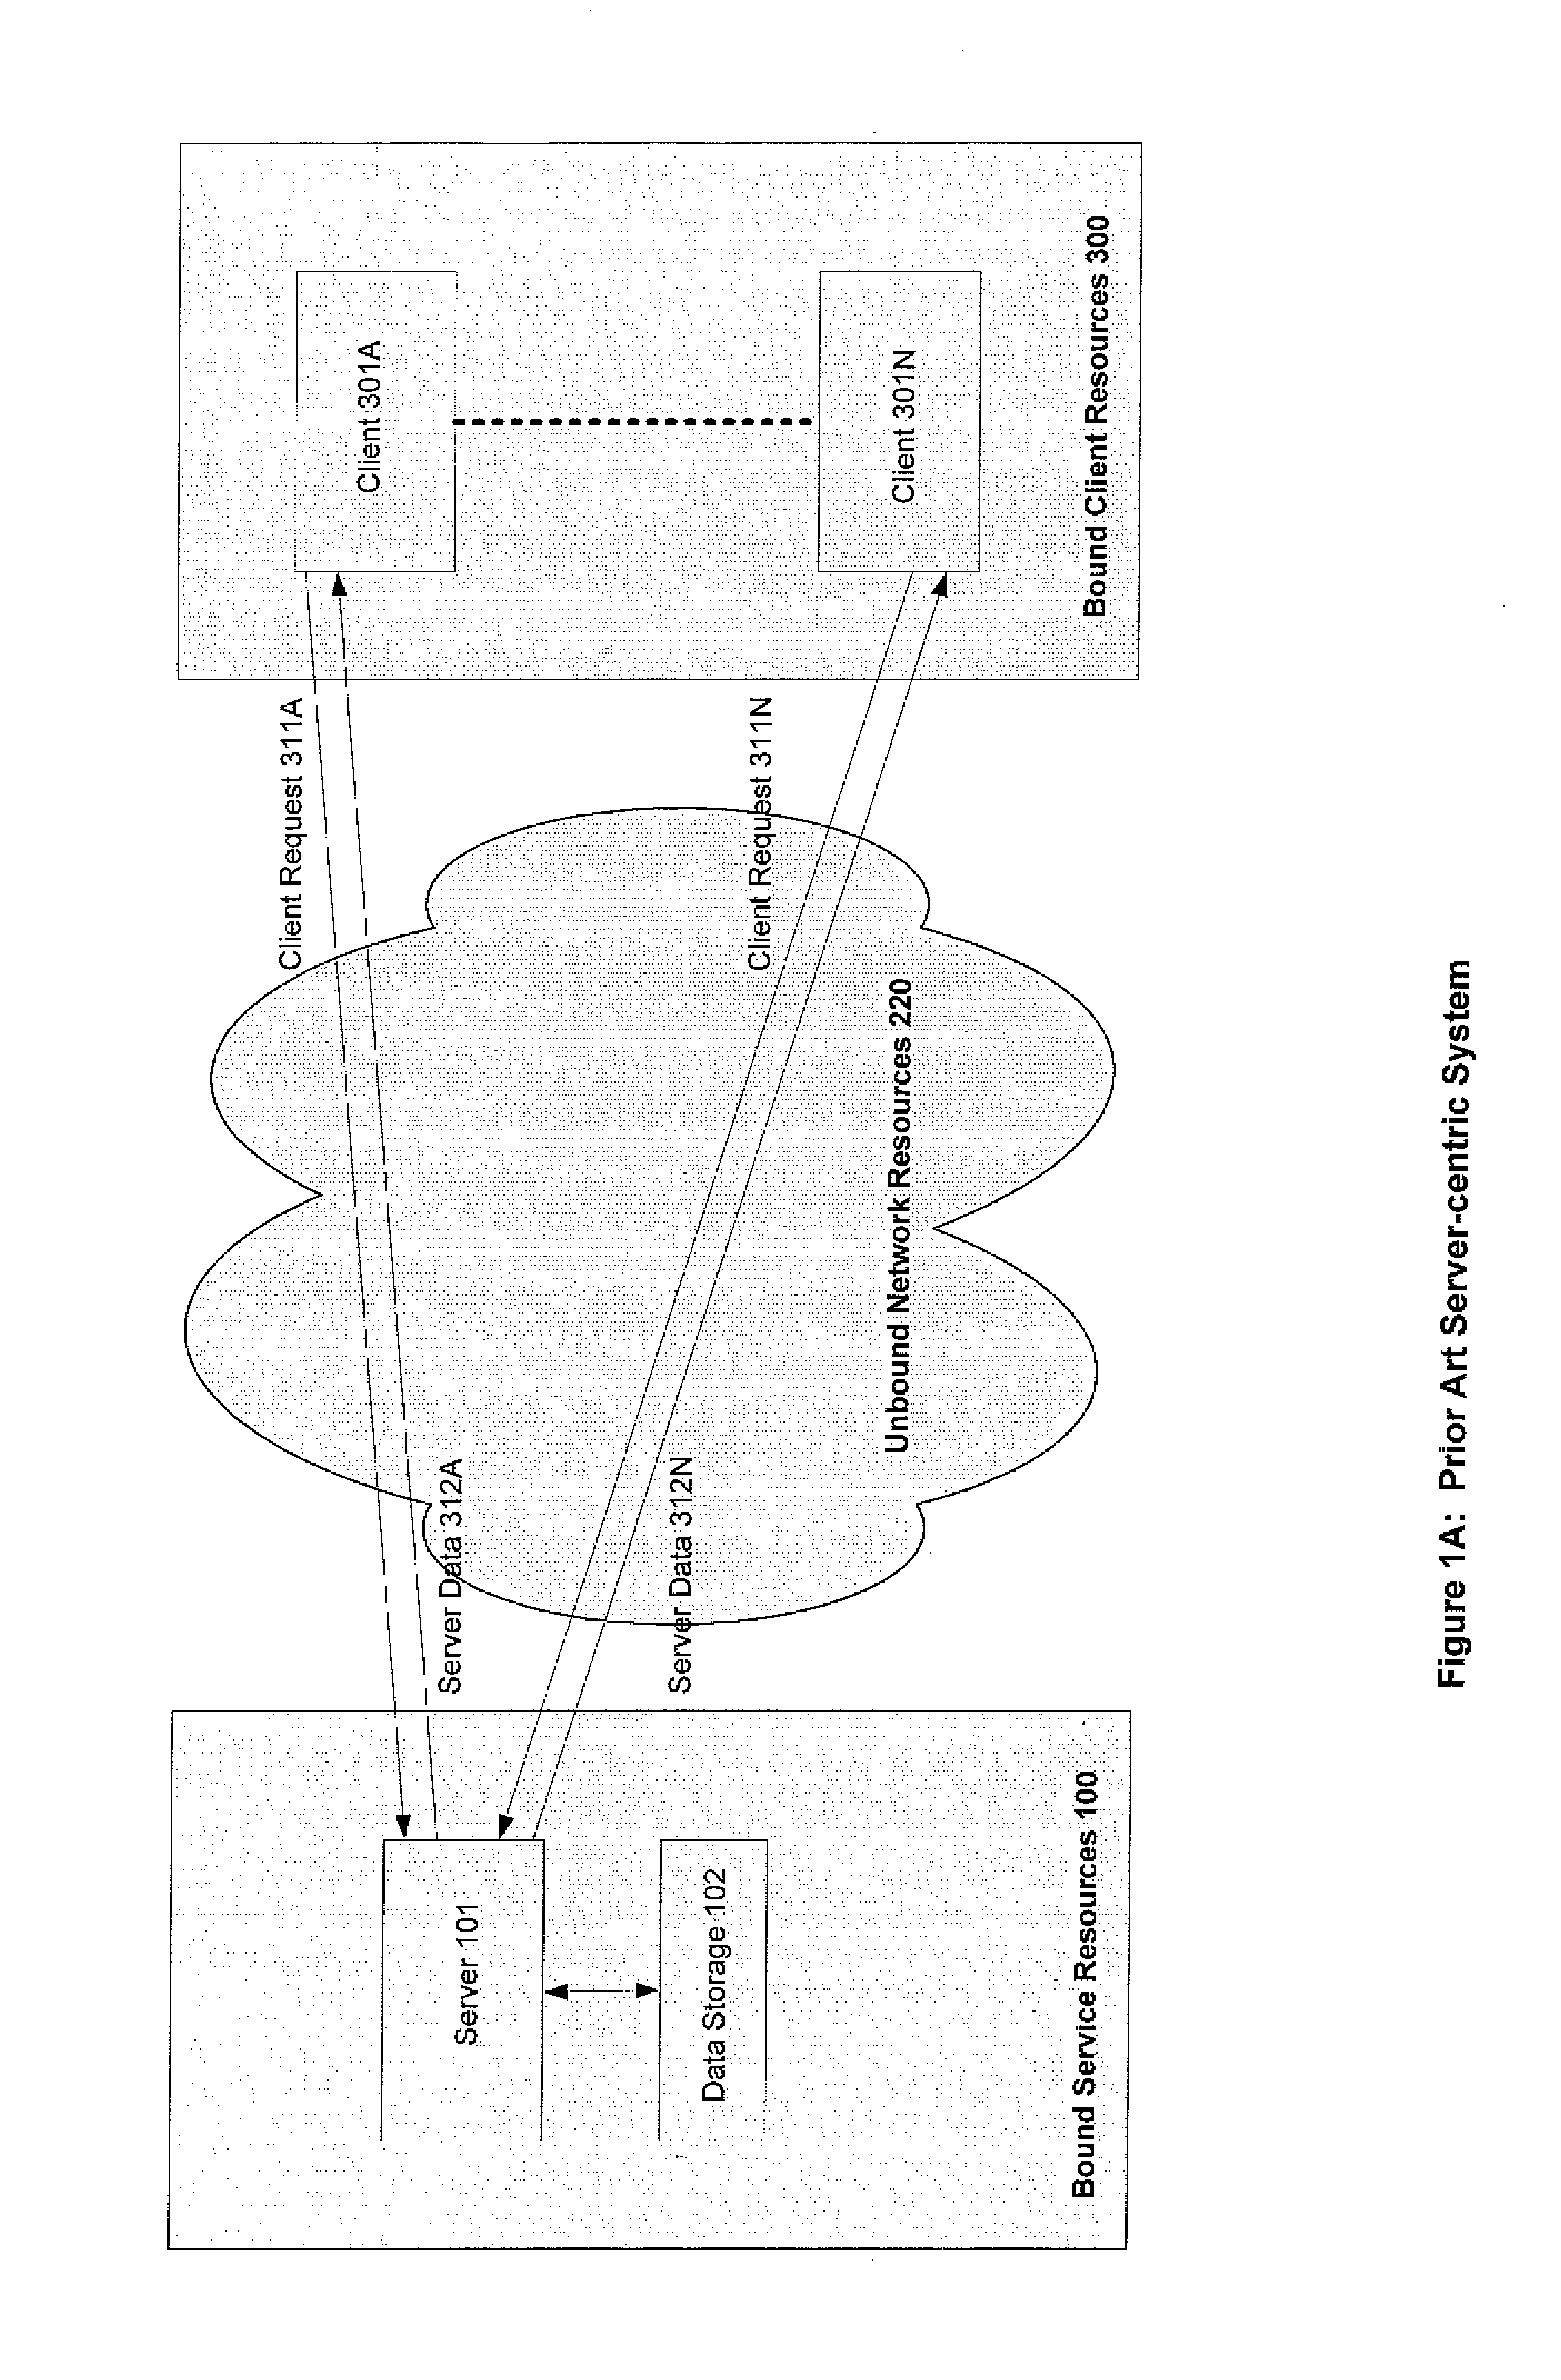 Systems and methods for multi-perspective optimization of data transfers in heterogeneous networks such as the internet